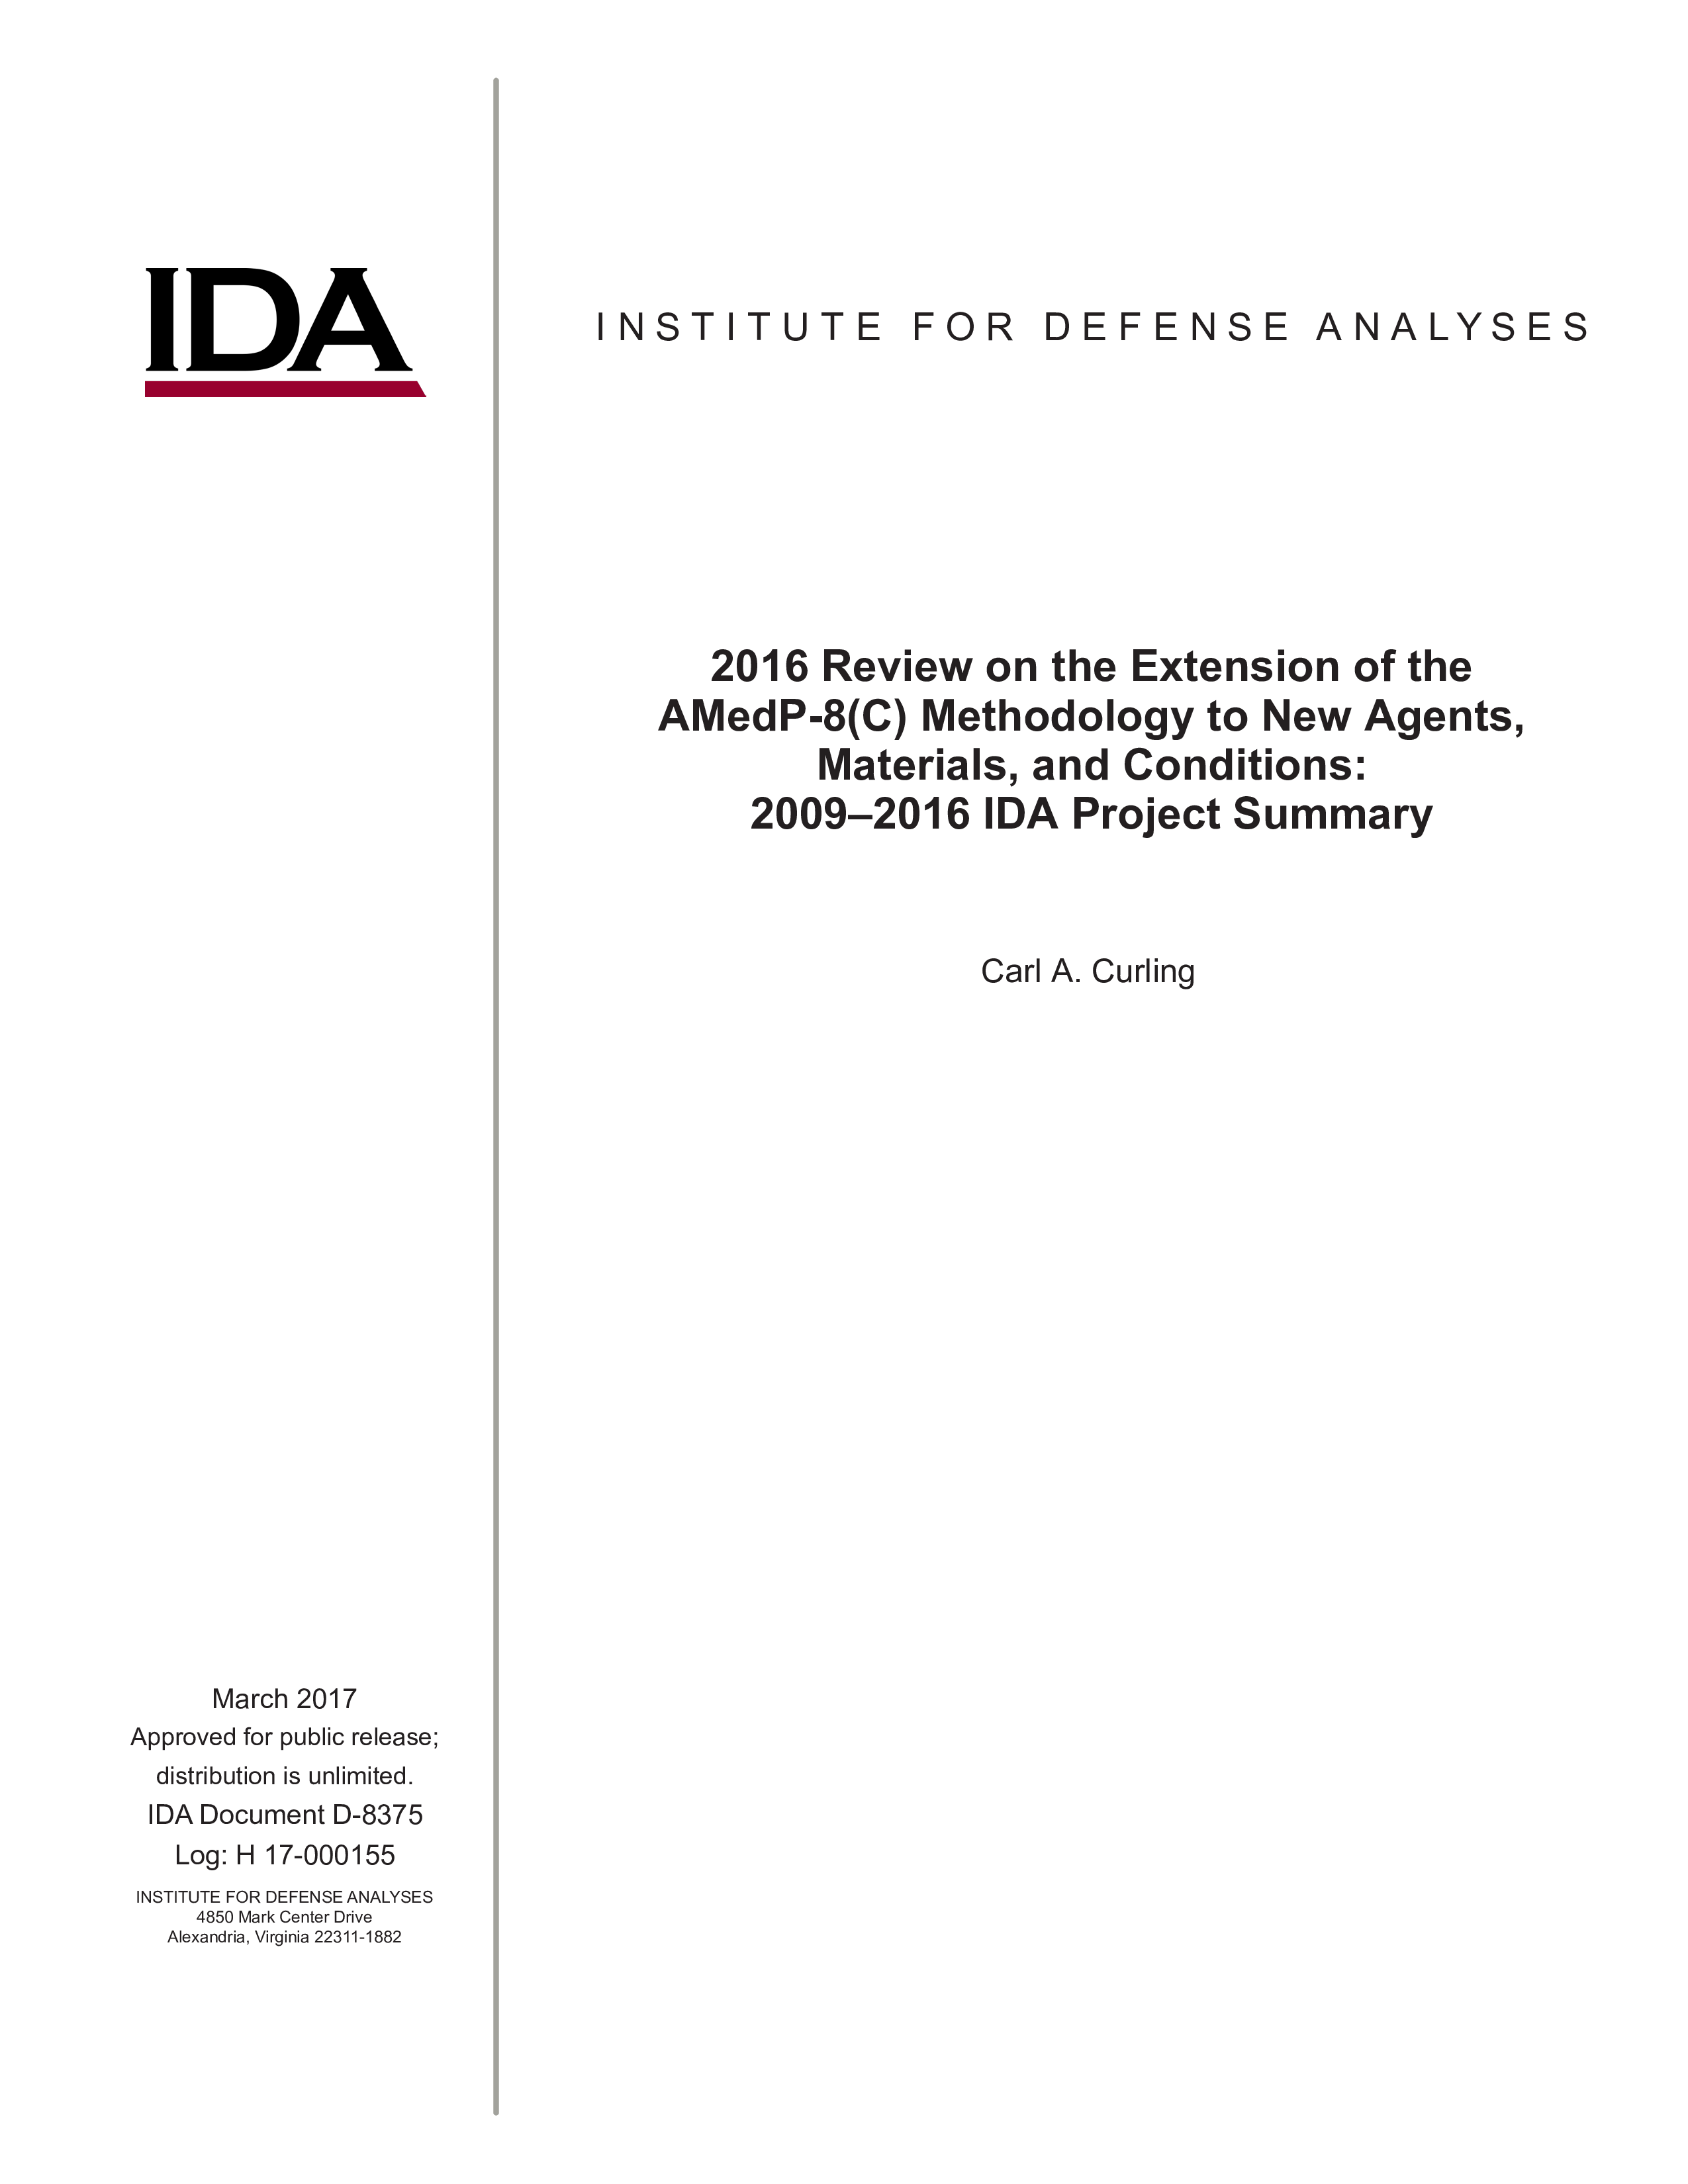 2016 Review on the Extension of the AMedP-8(C) Methodology to New Agents, Materials, and Conditions: 2009–2016 IDA Project Summary